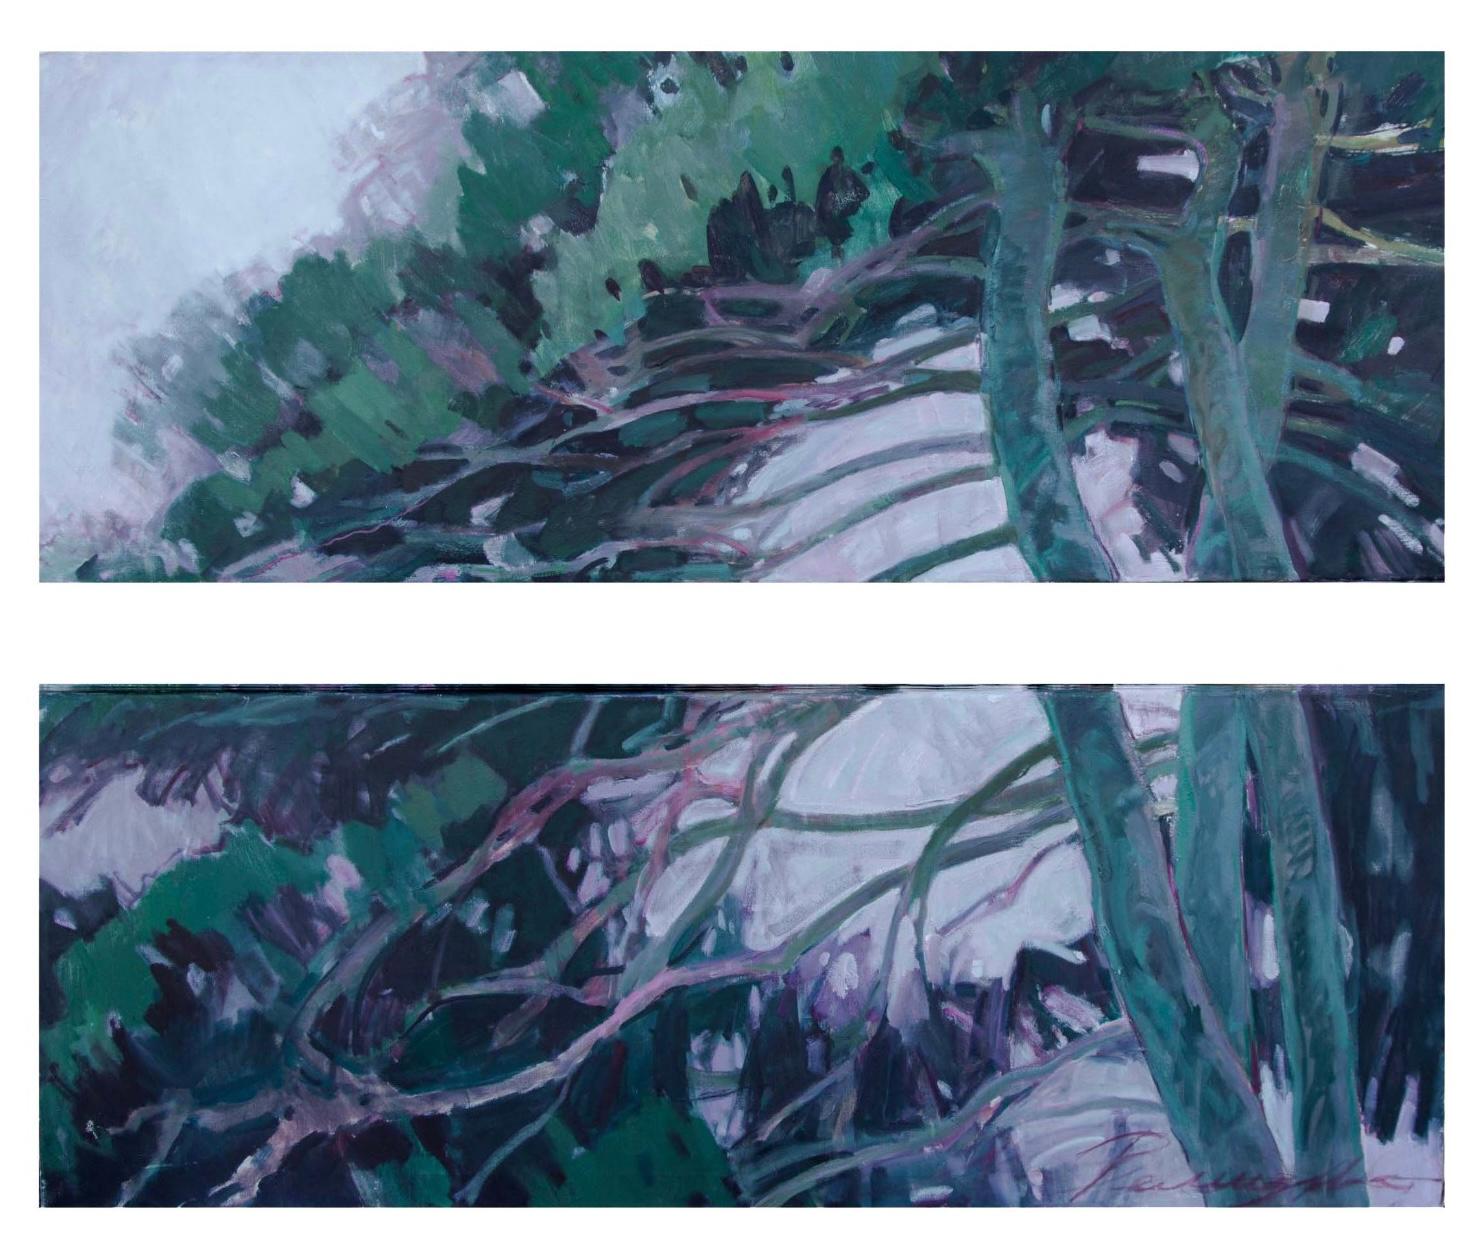 "Pines" diptych. Project "Wind", Canvas, oil, 120x160 cm